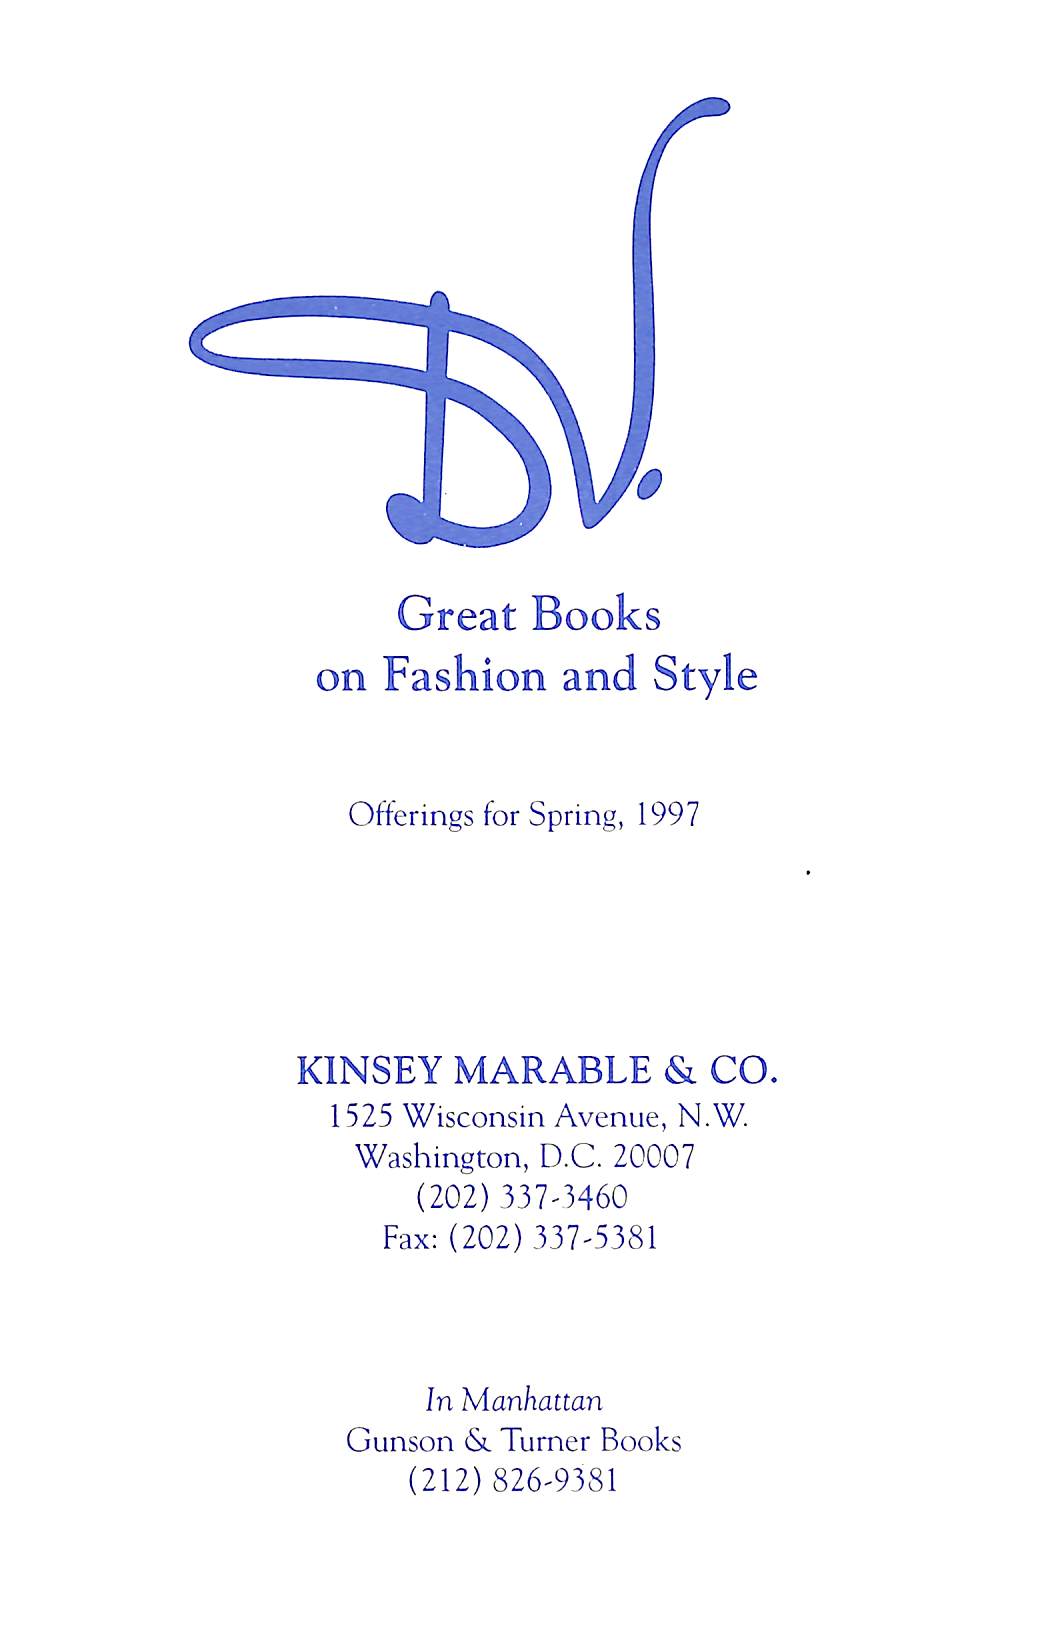 DV Great Books on Fashion and Style Spring 1997